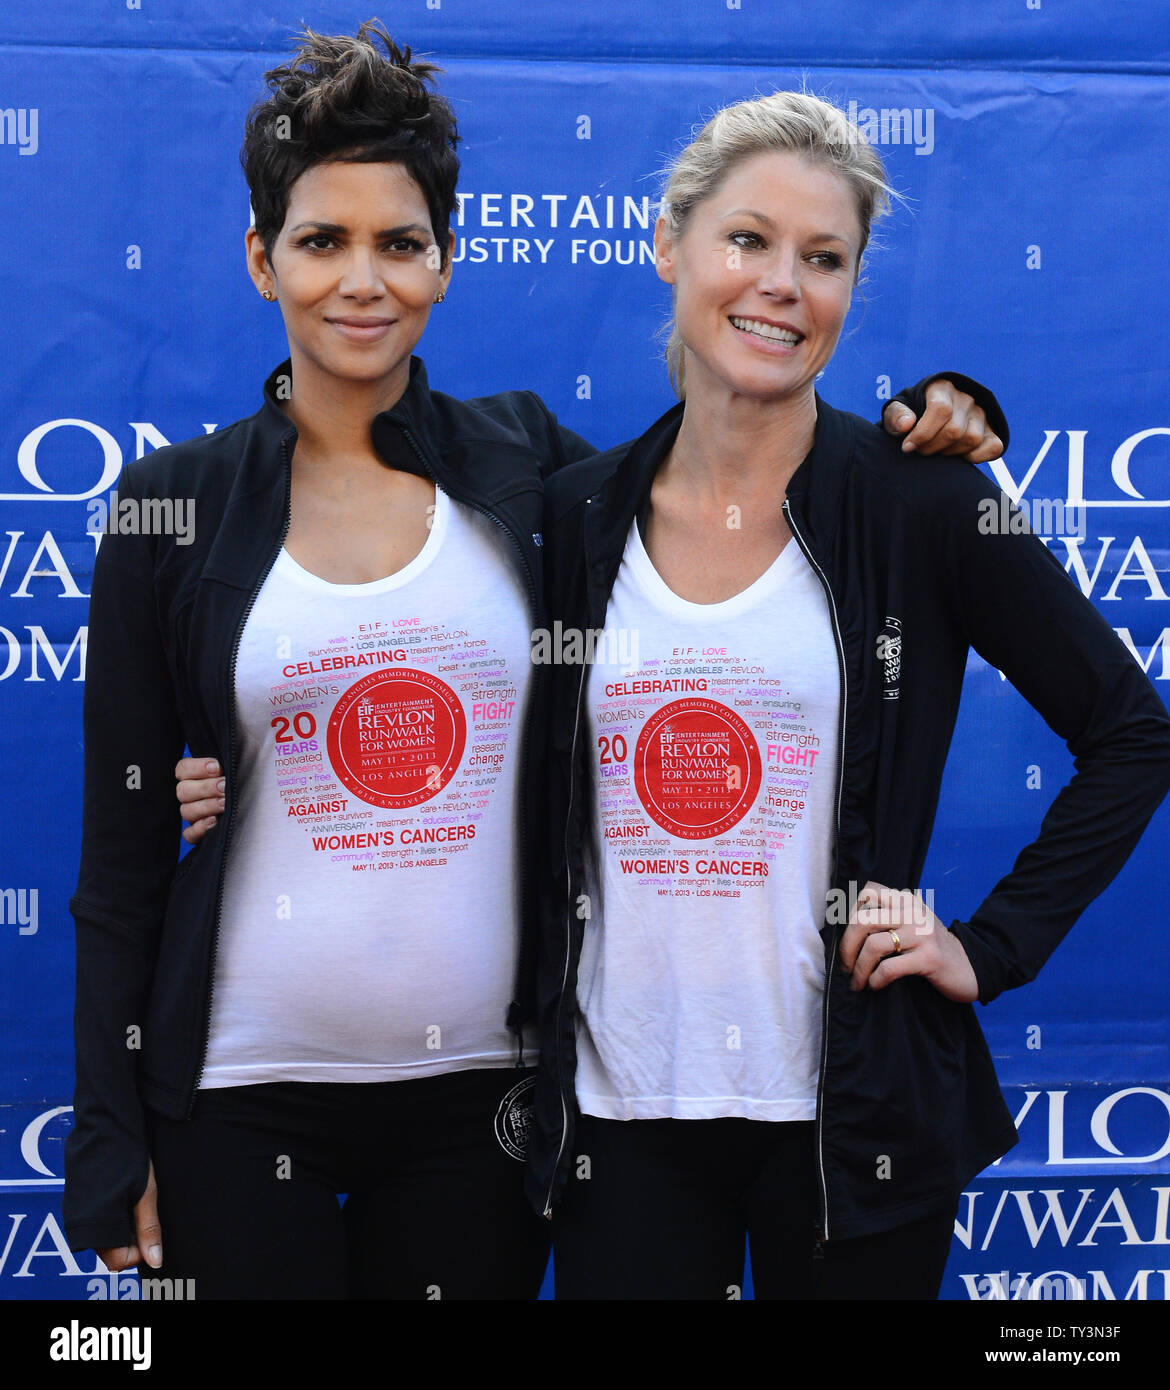 Actresses Halle Berry (L) and Julie Bowen participate in the 20th Annual EIF Revlon Run/Walk For Women at the Los Angeles Memorial Coliseum in Los Angeles on May 11, 2013.  UPI/Jim Ruymen Stock Photo